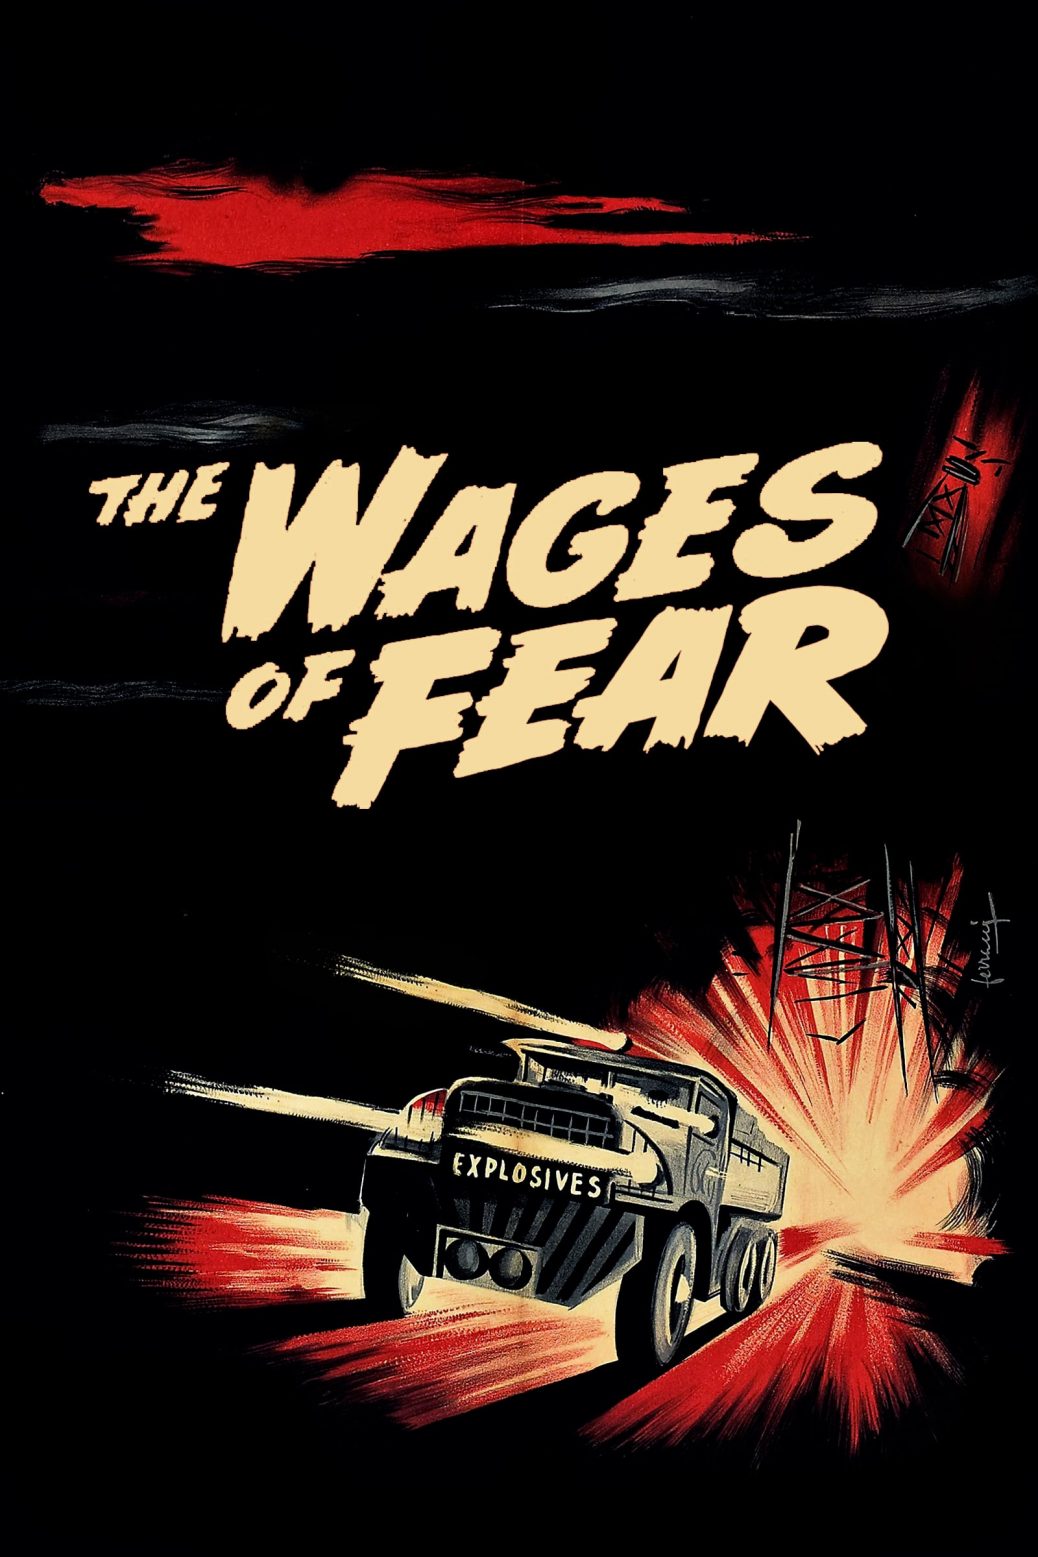 Poster for the movie "The Wages of Fear"